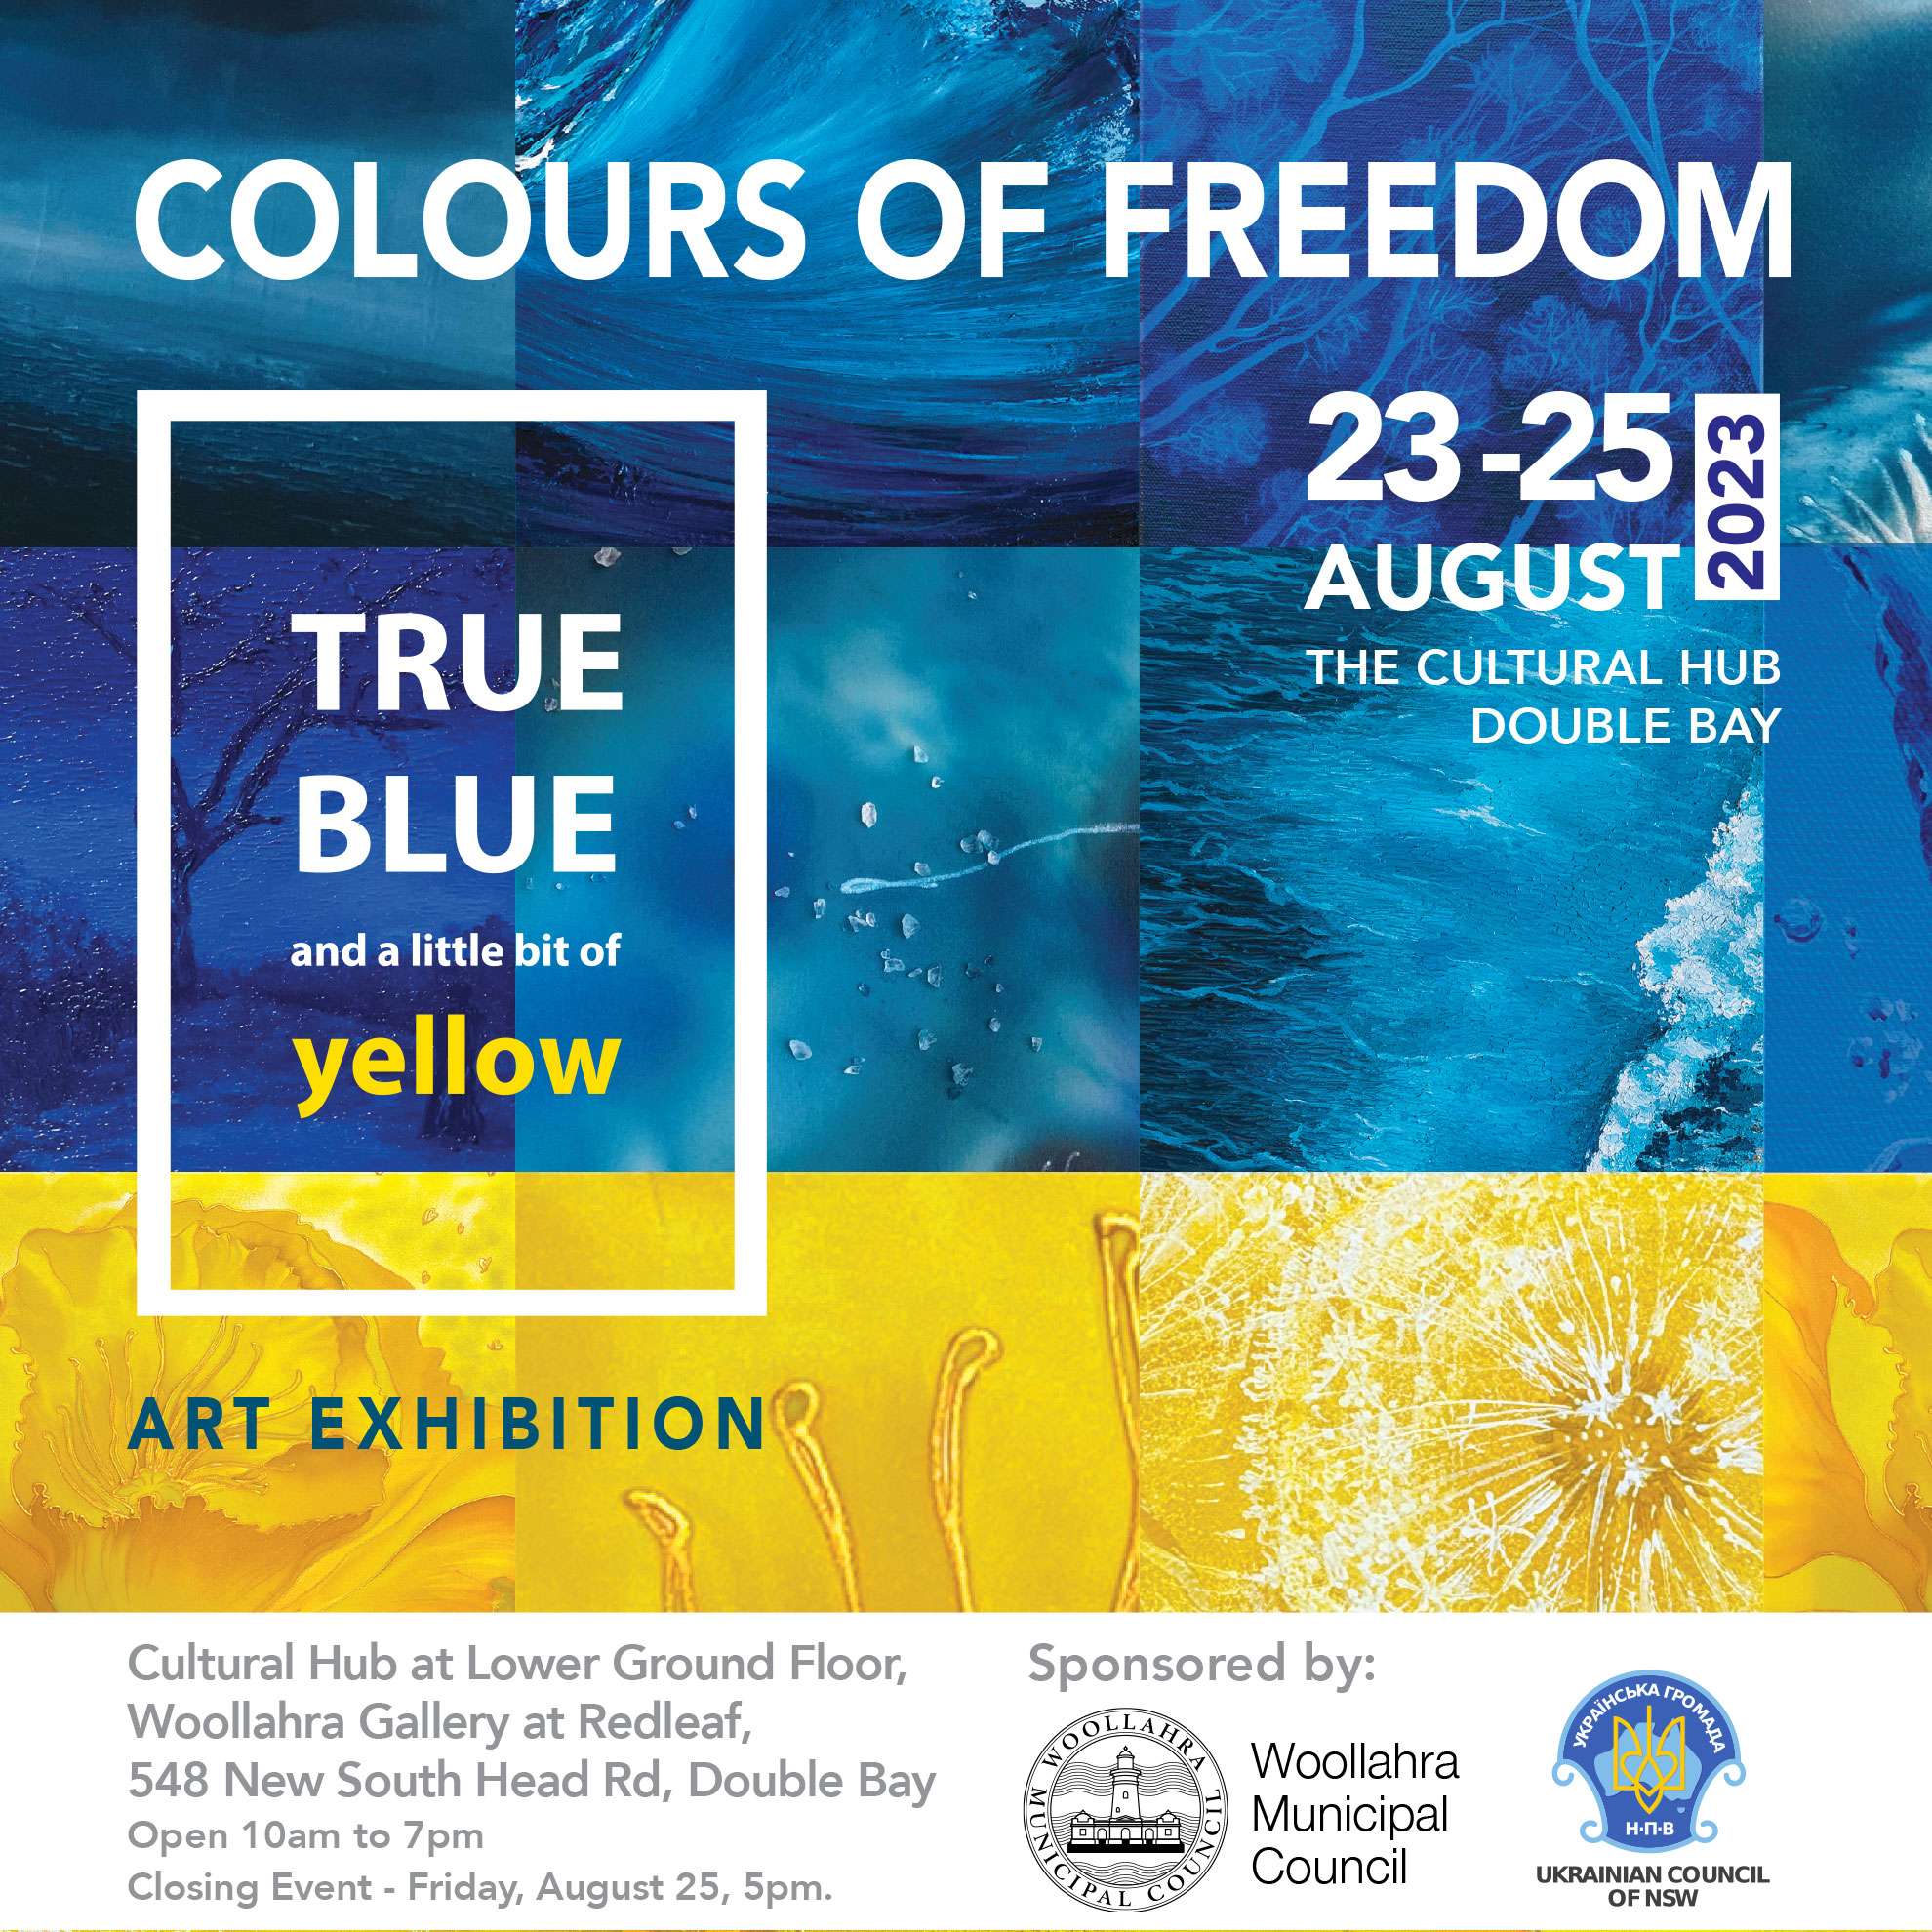 Colours of Freedom Art Exhibition and Fundraiser - Woollahra